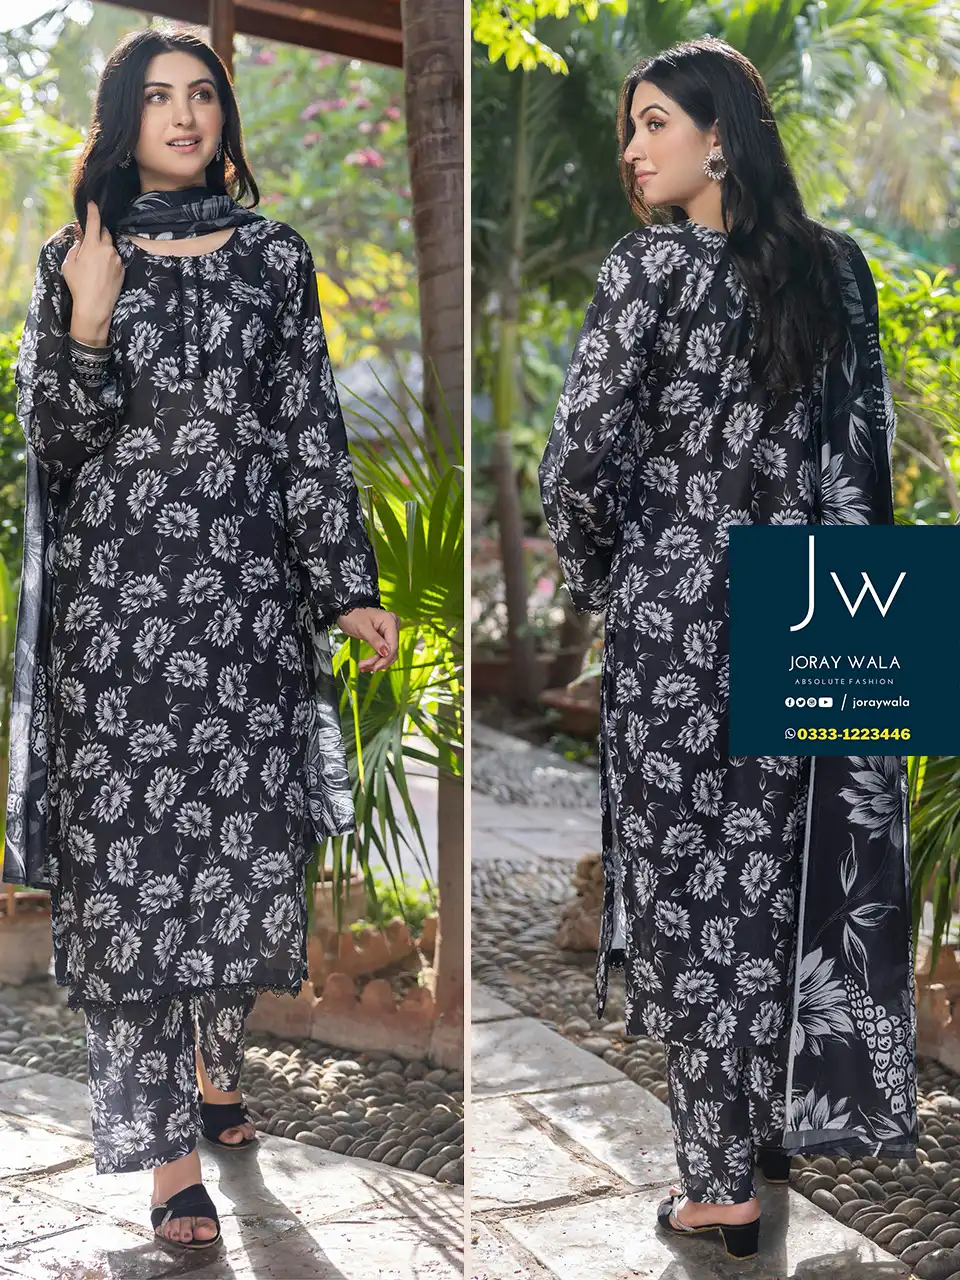 Iris allover black and white 3 pcs suit D4 with free delivery available at joraywala. AirJet Luxury Digital Printed Lawn Shirt. Airjet Luxury Digital Printed Lawn Dupatta. AirJet Luxury Digital Printed Trouser.